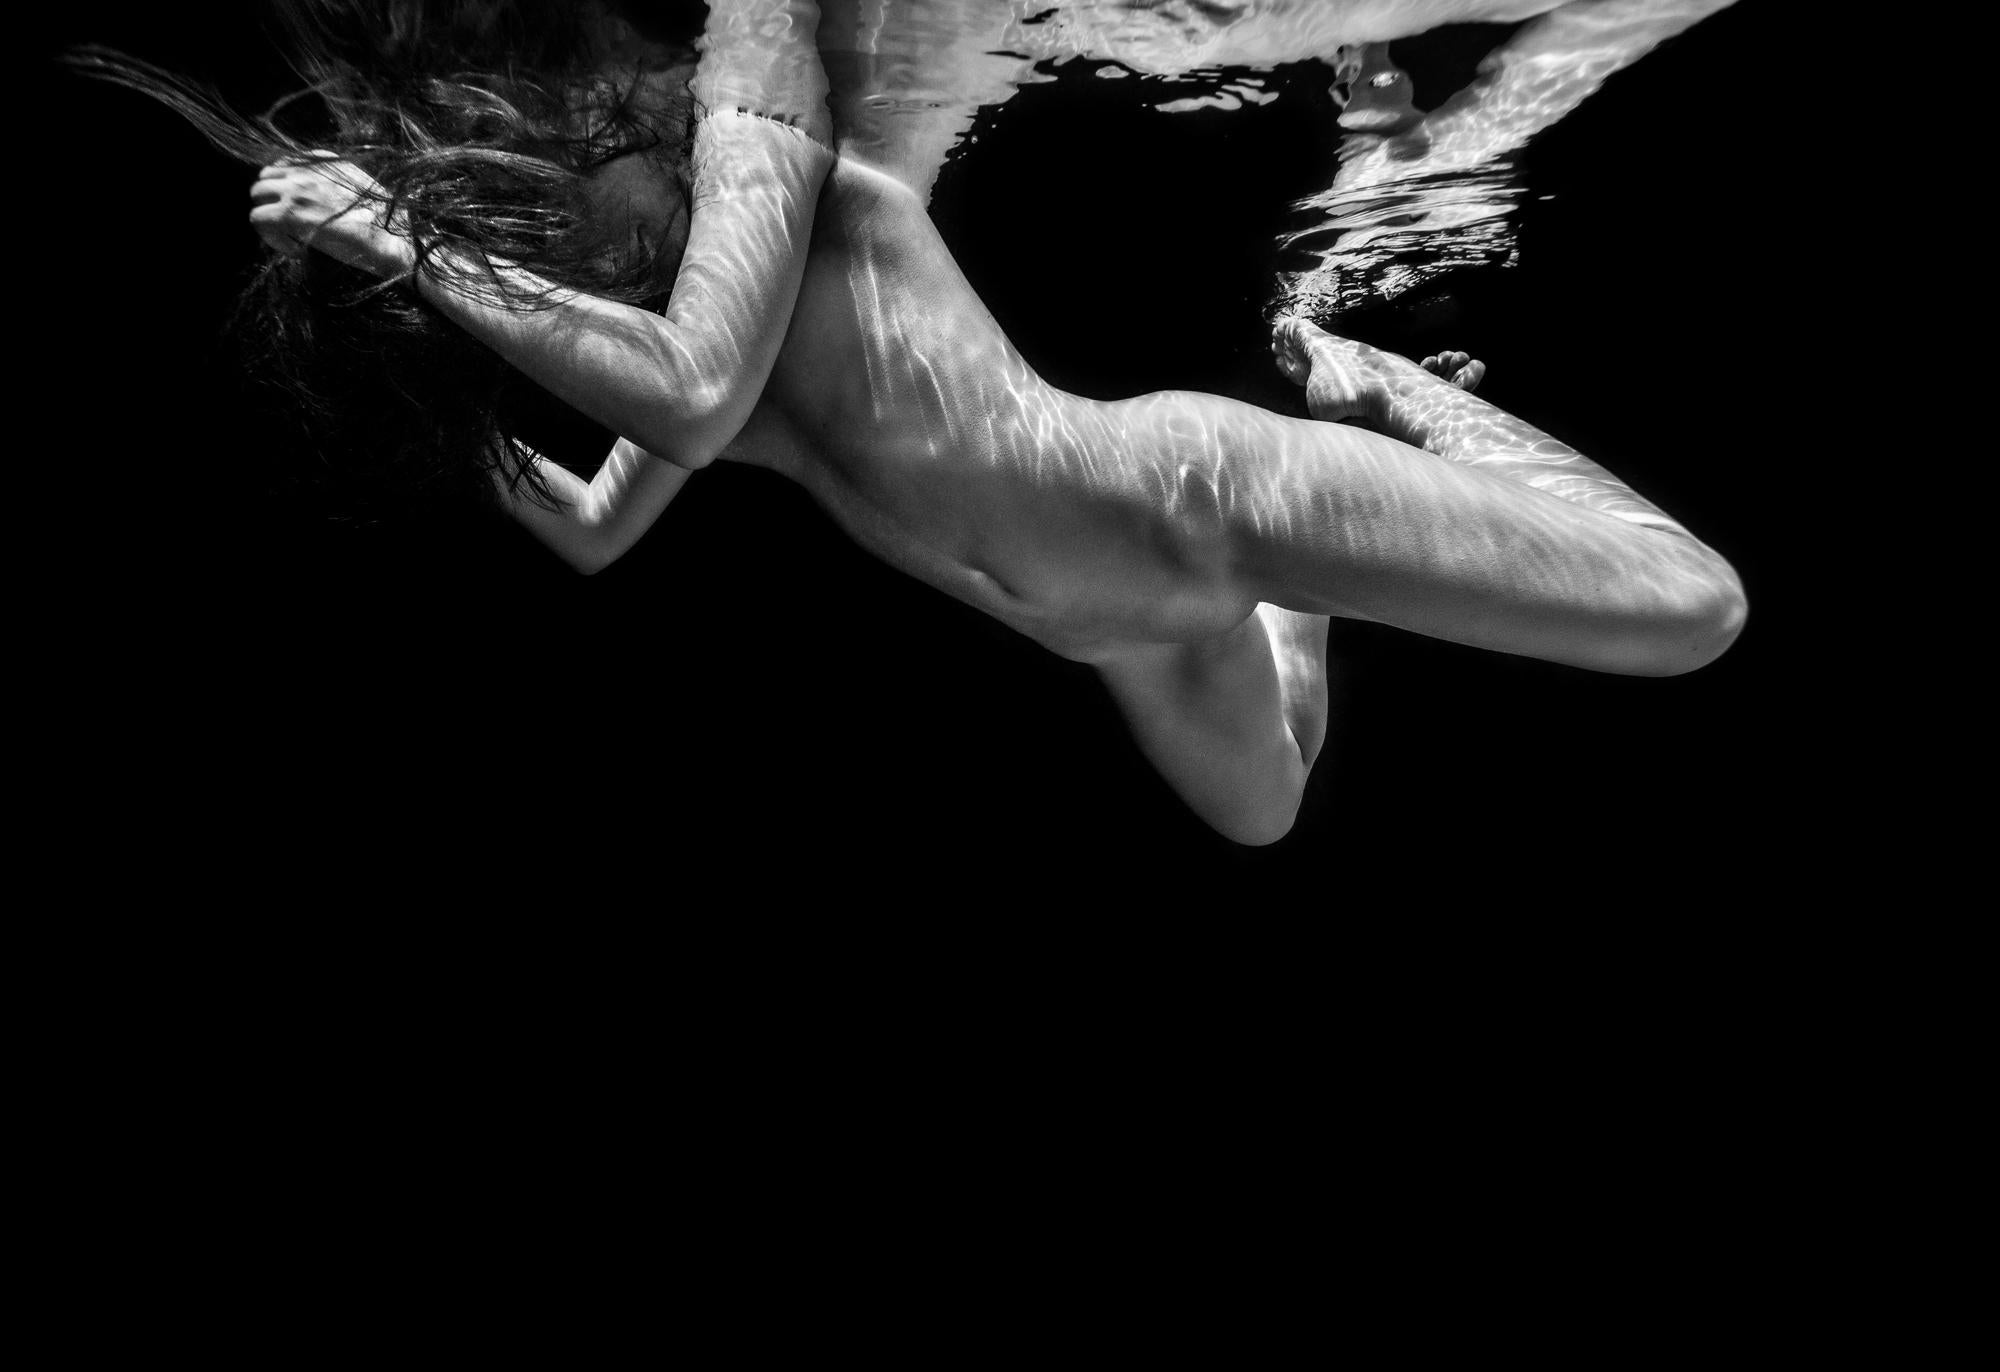 The Smile - underwater b&w nude photograph - print on aluminum